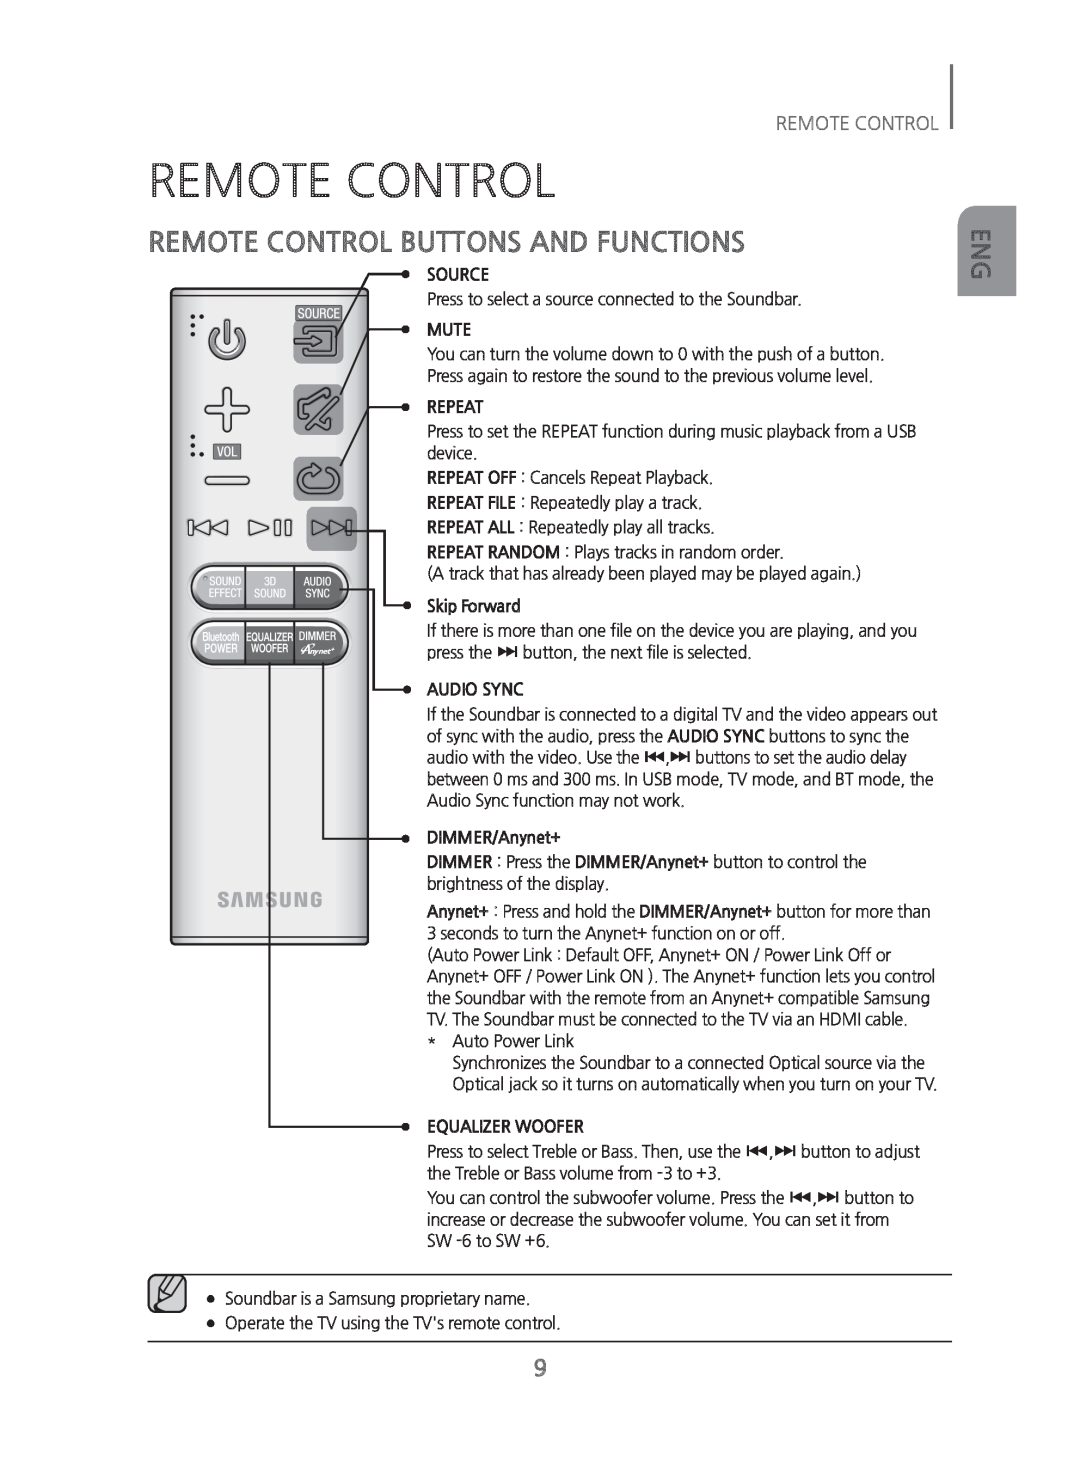 Samsung HW-H450/ZA manual Remote Control Buttons And Functions, Source, Mute, Repeat, Skip Forward, Audio Sync 